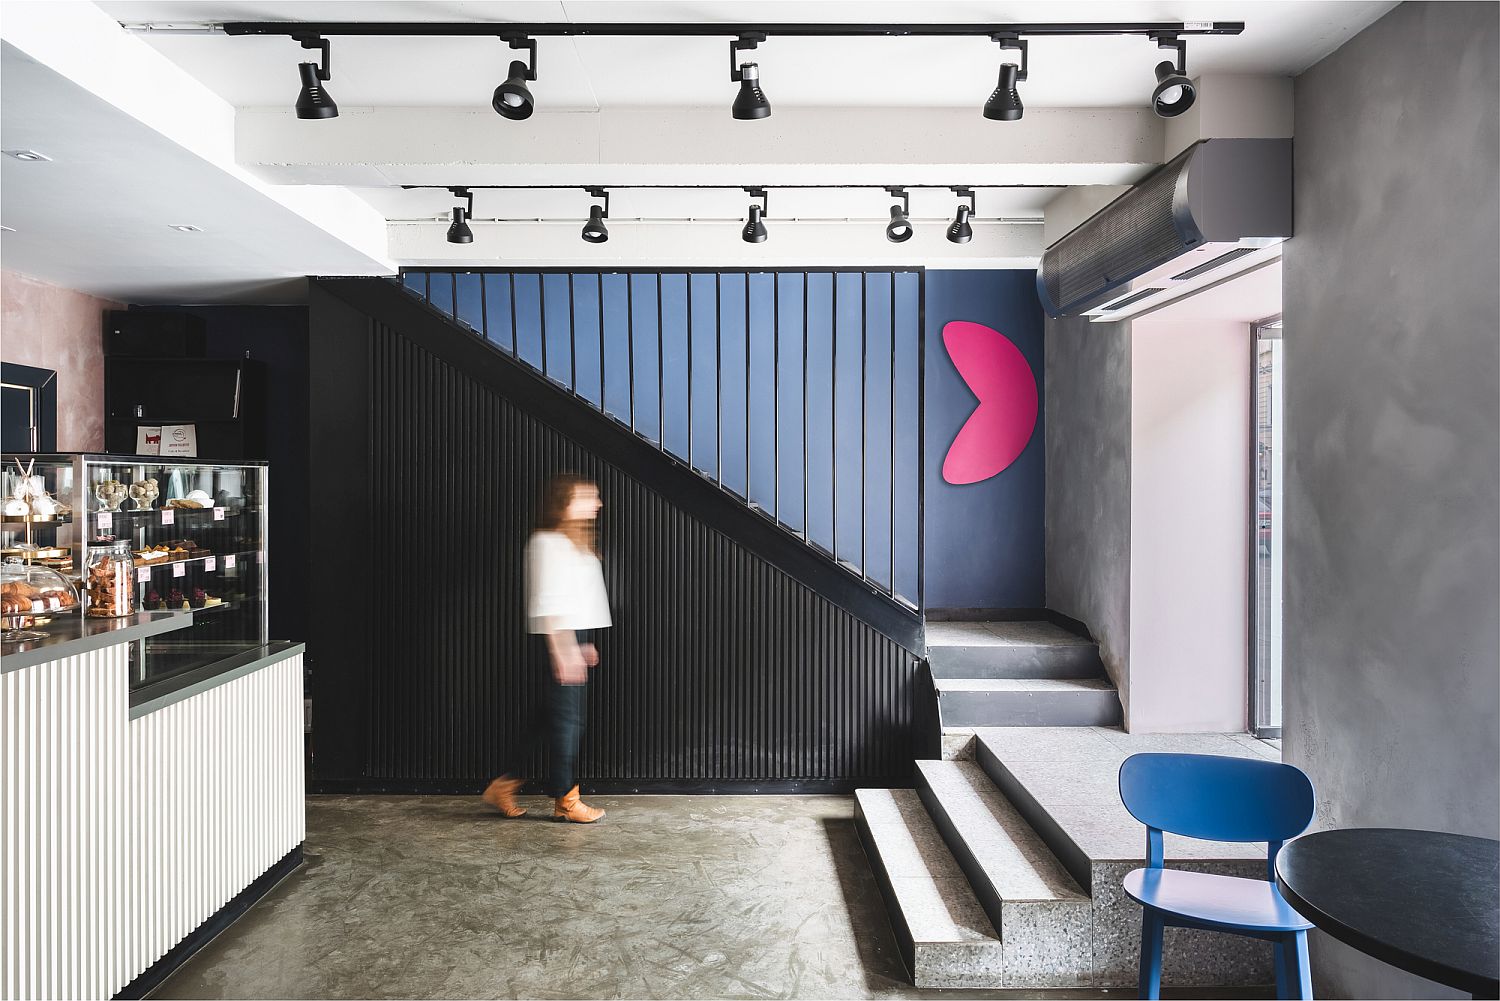 Black-anchors-the-cafe-takeaway-zone-with-color-and-concrete